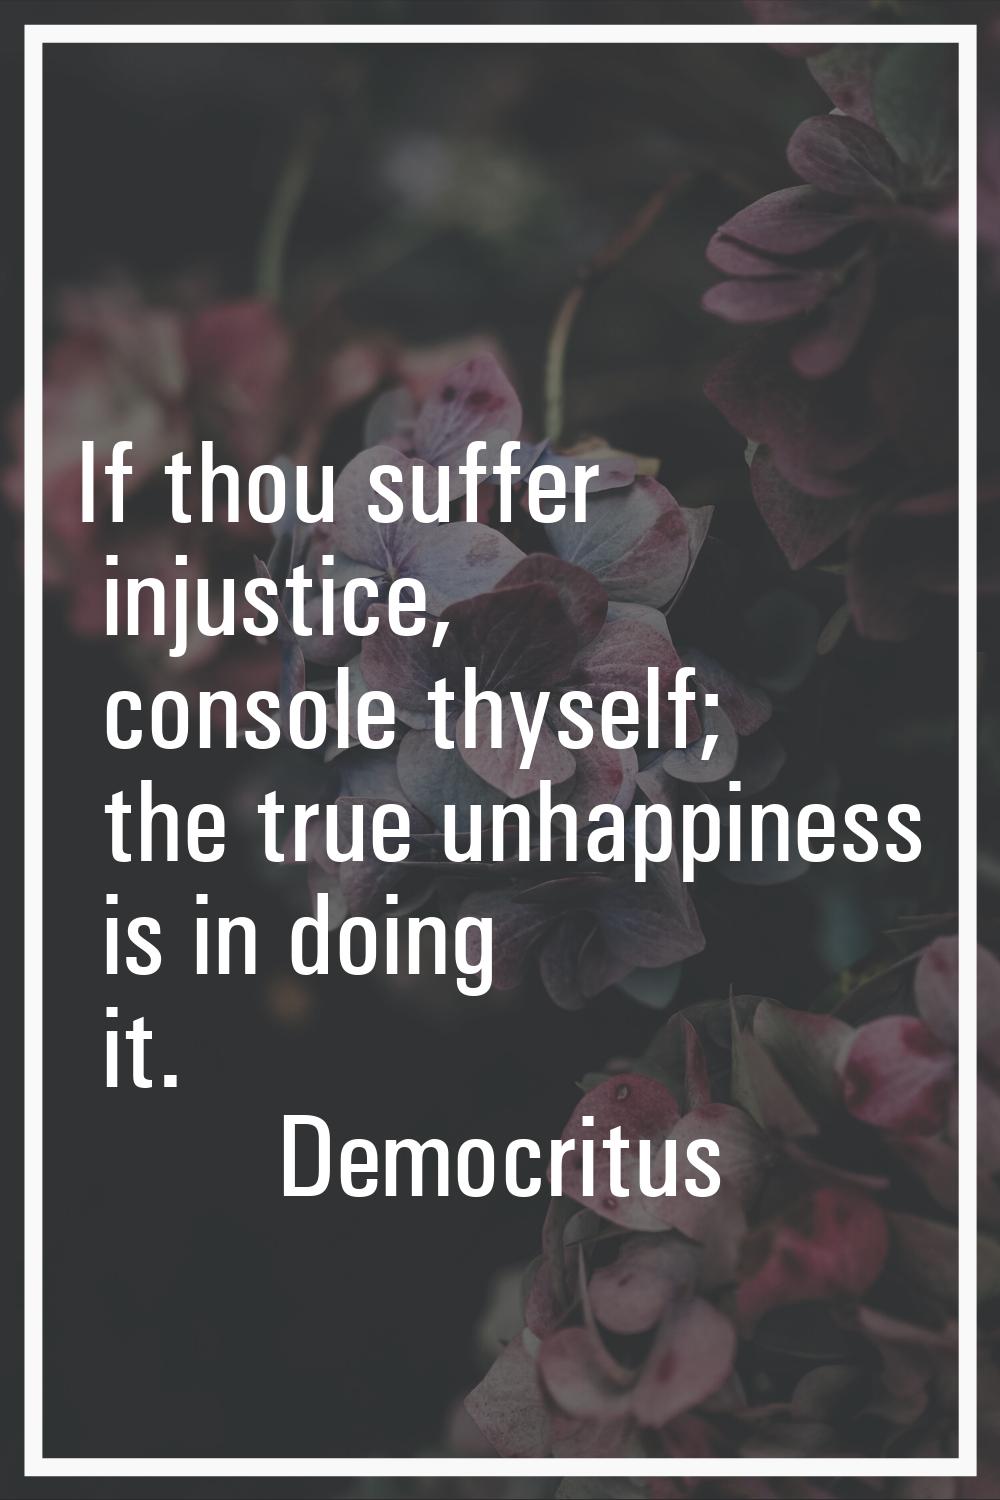 If thou suffer injustice, console thyself; the true unhappiness is in doing it.